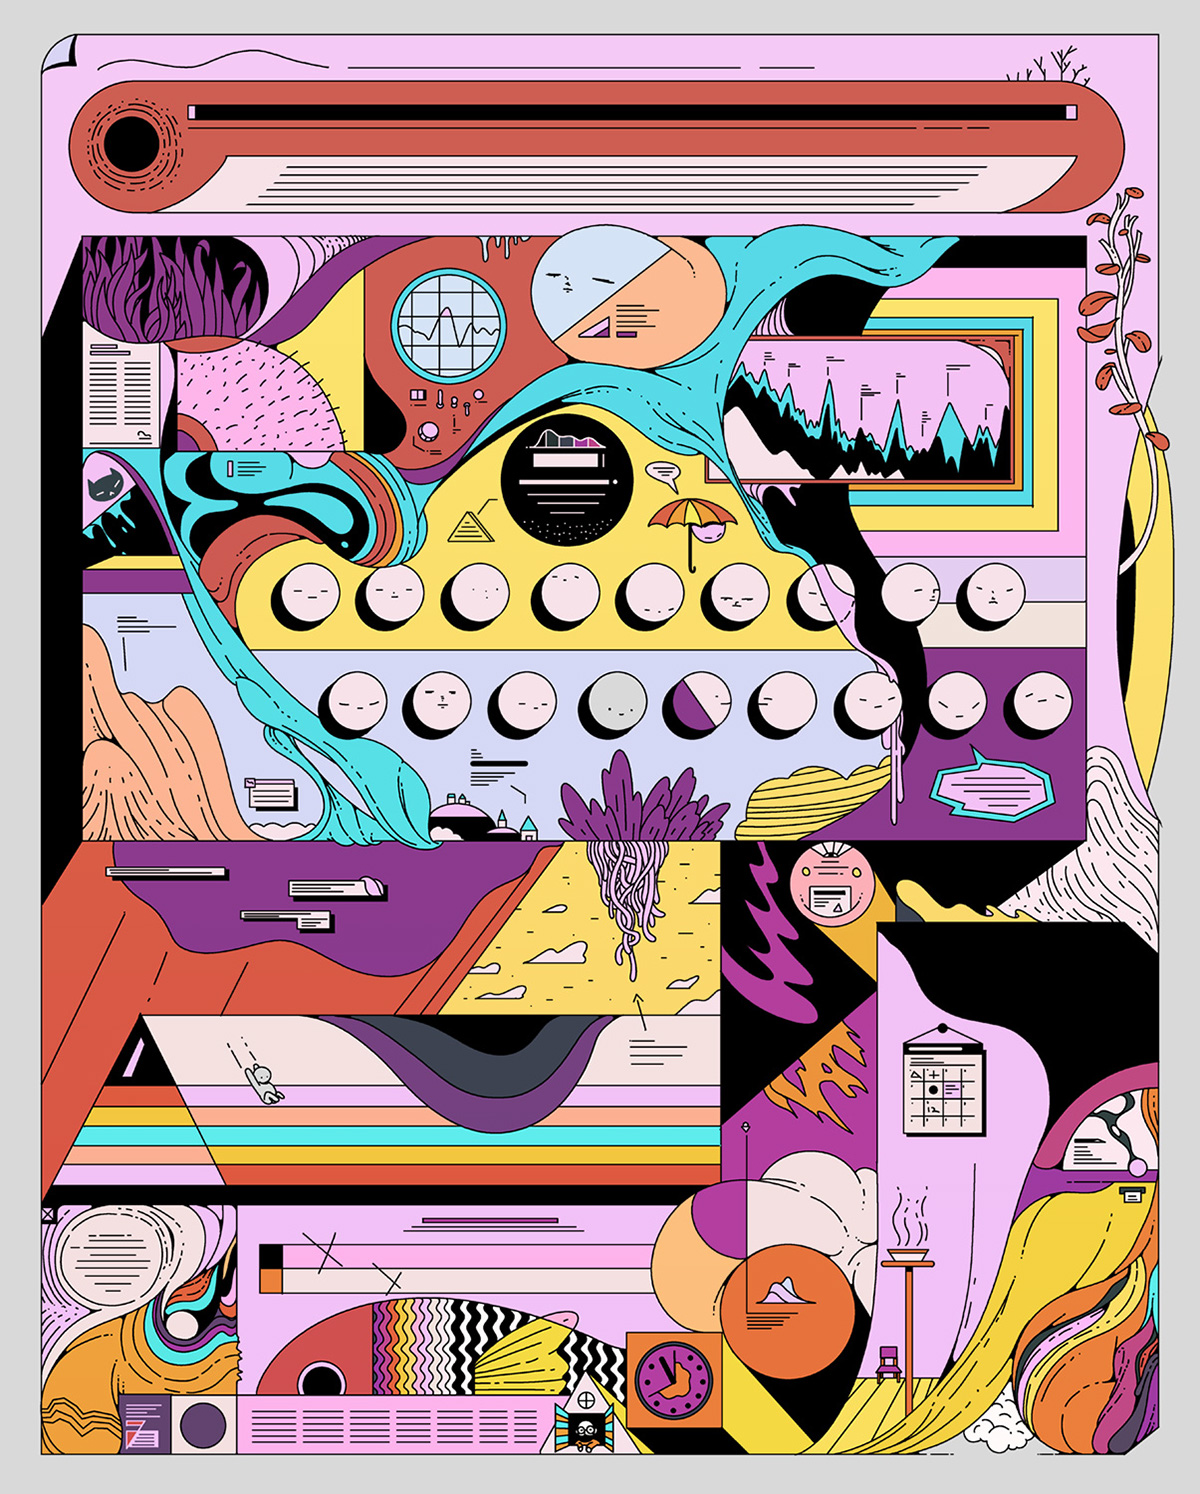 infographics Data gribberish poster imaginary flat trippy characters psychedelic flow